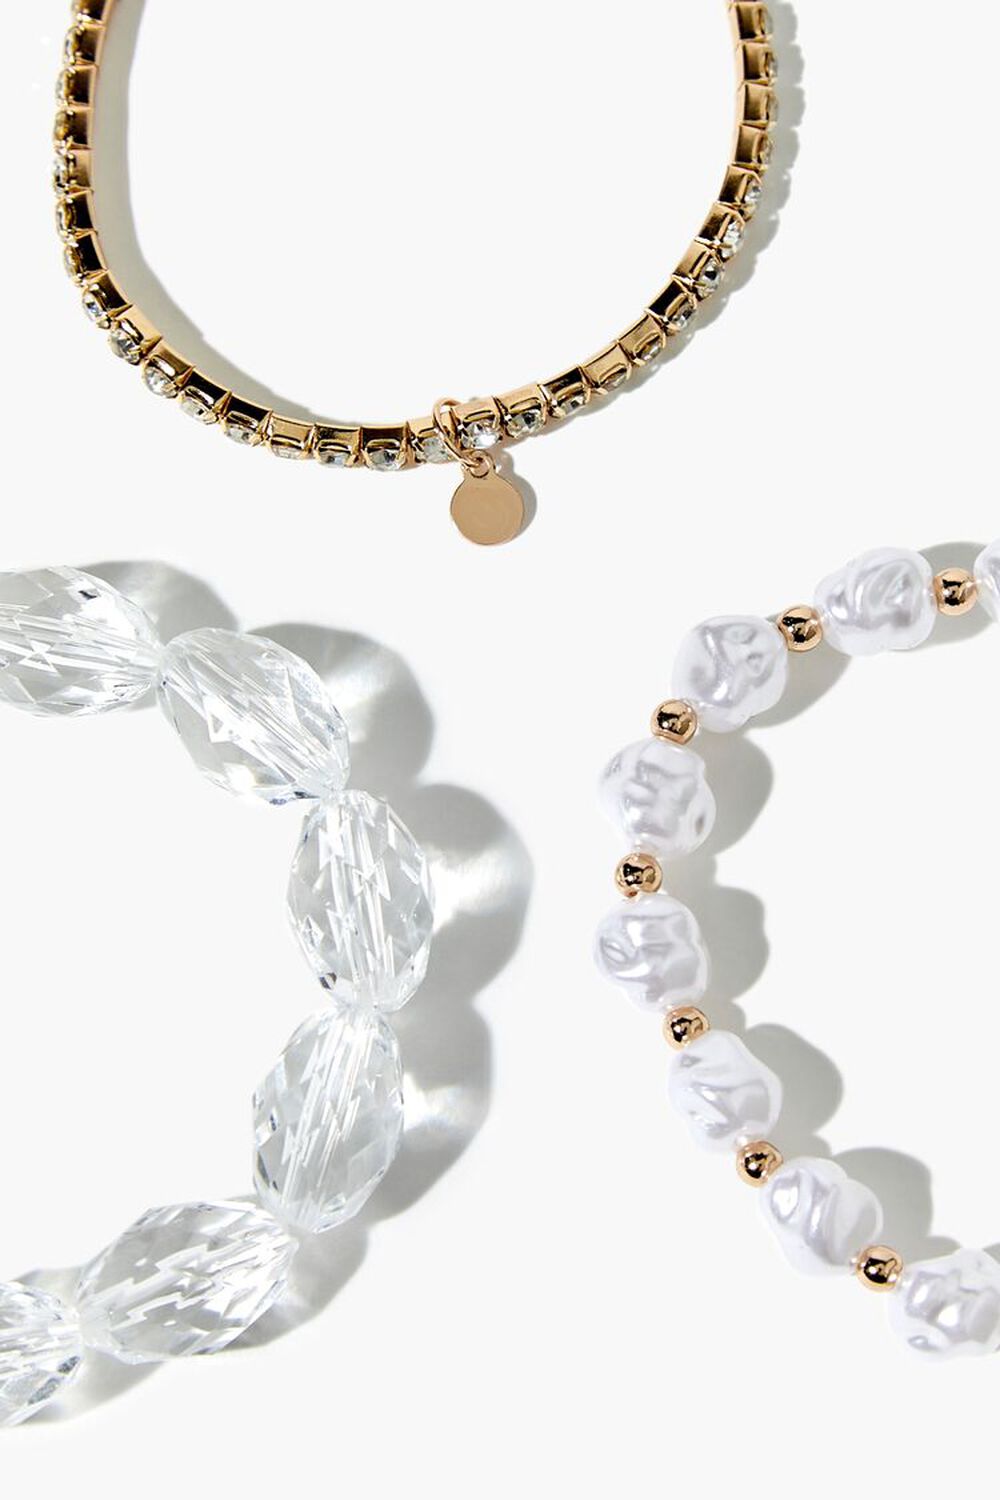 GOLD/CLEAR Faux Pearl Beaded Bracelet Set, image 1